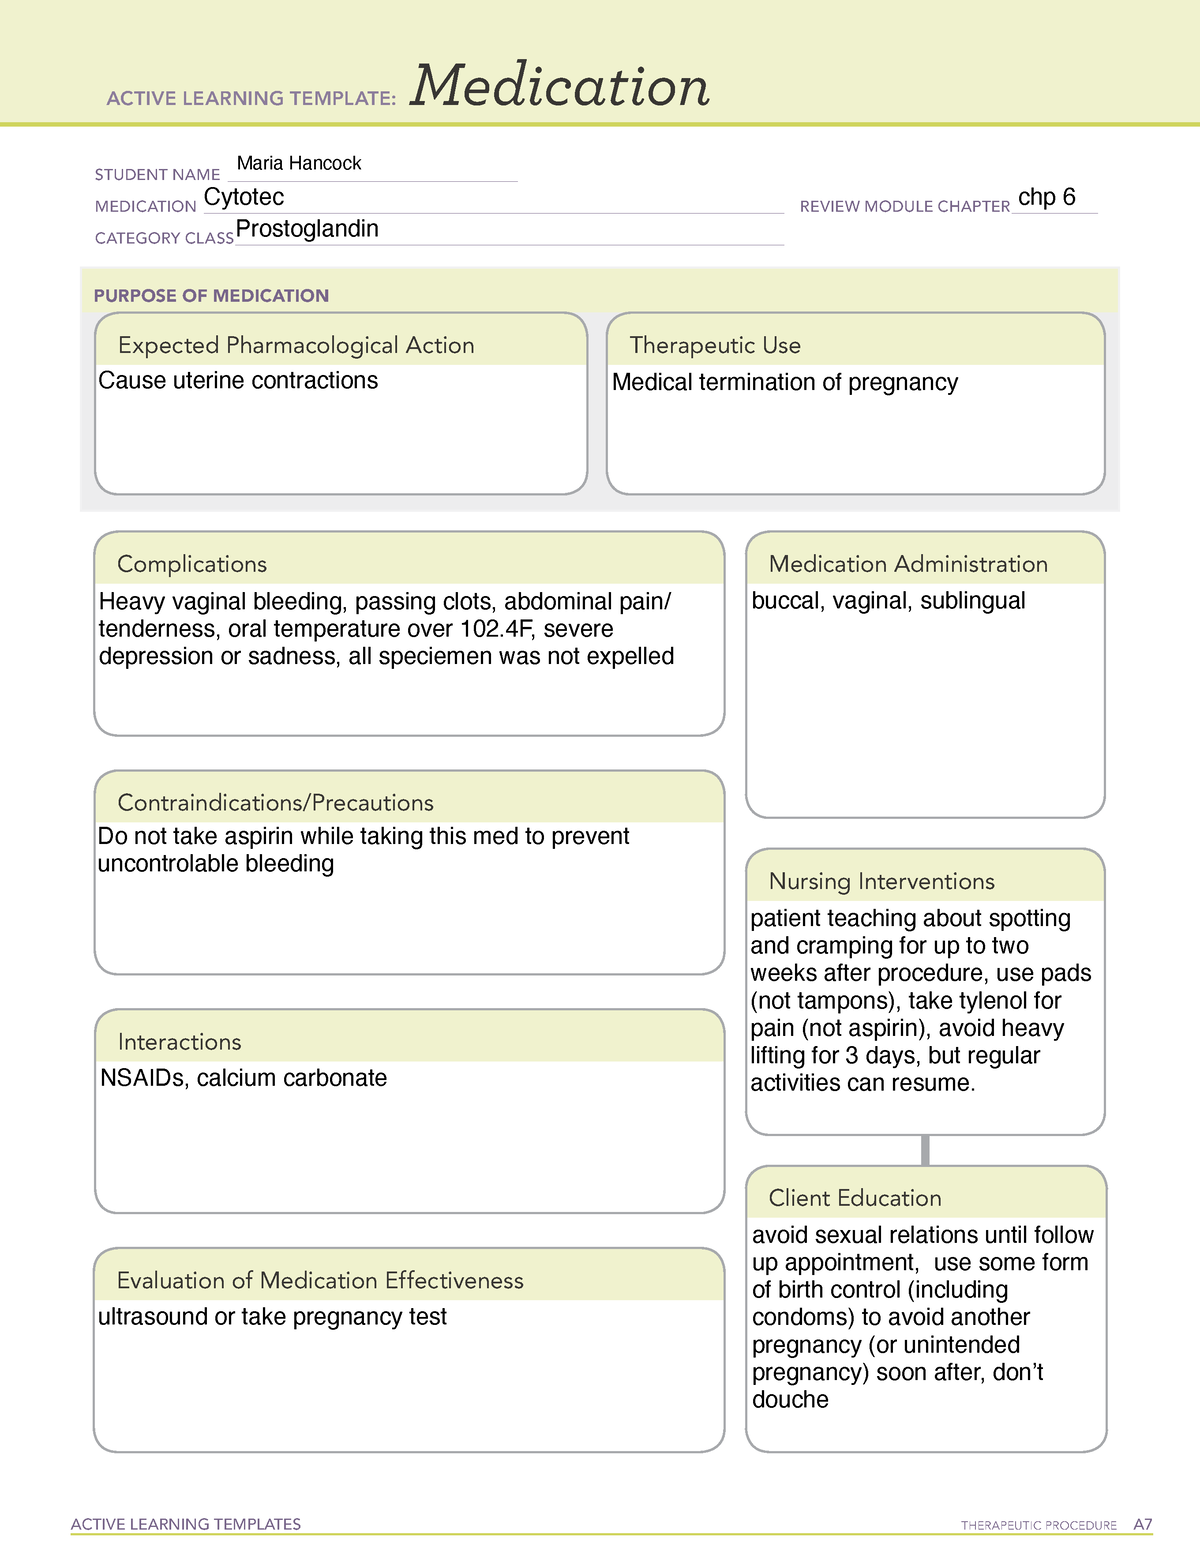 ATI Active Learning Template medication-2 - ACTIVE LEARNING TEMPLATES ...